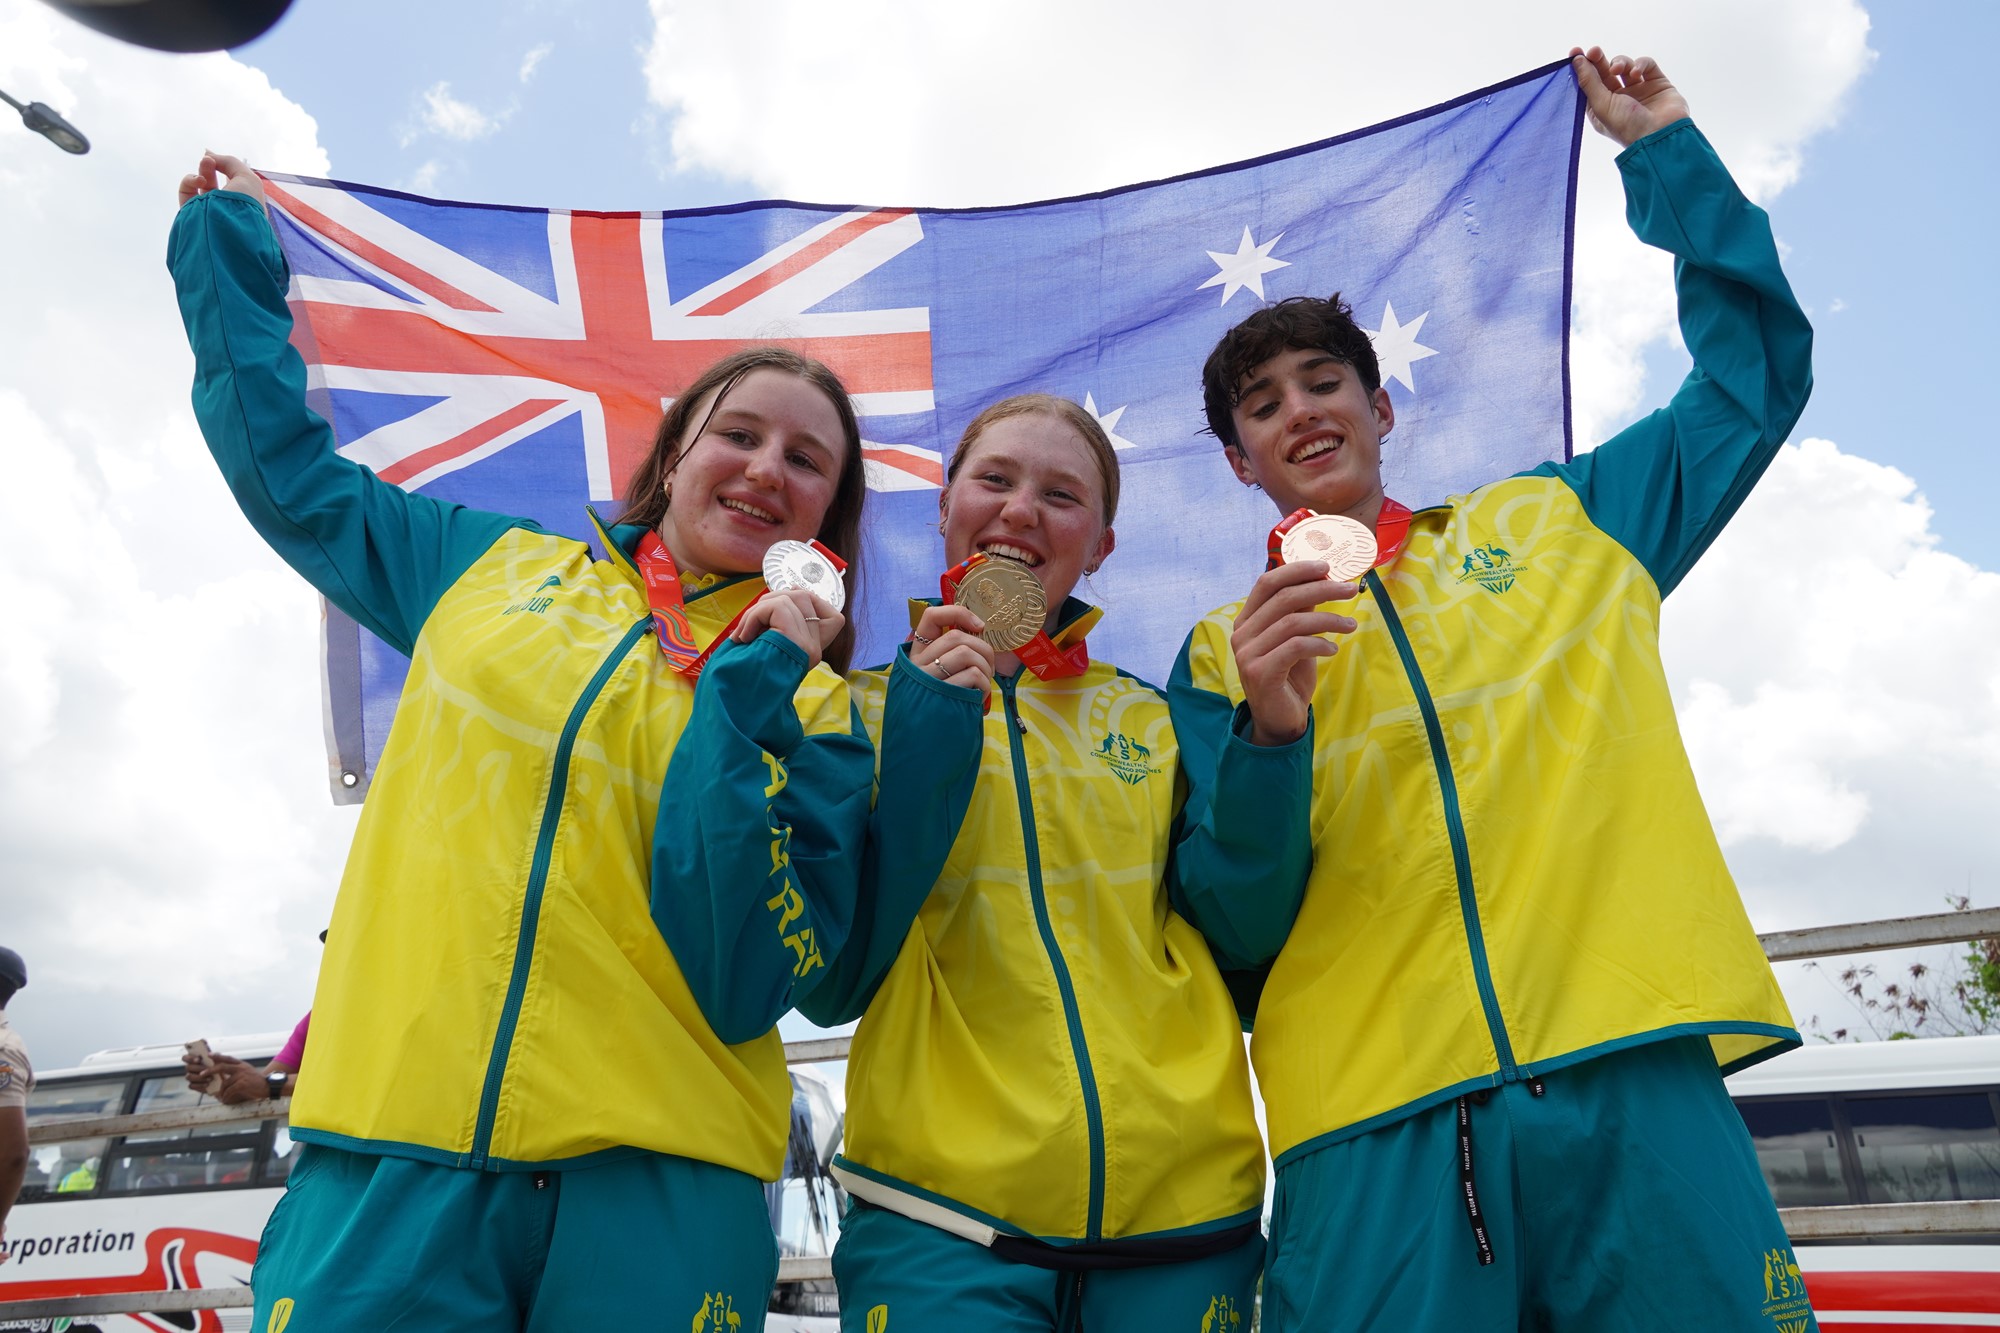 Three people in green and yellow jackets hold up medals